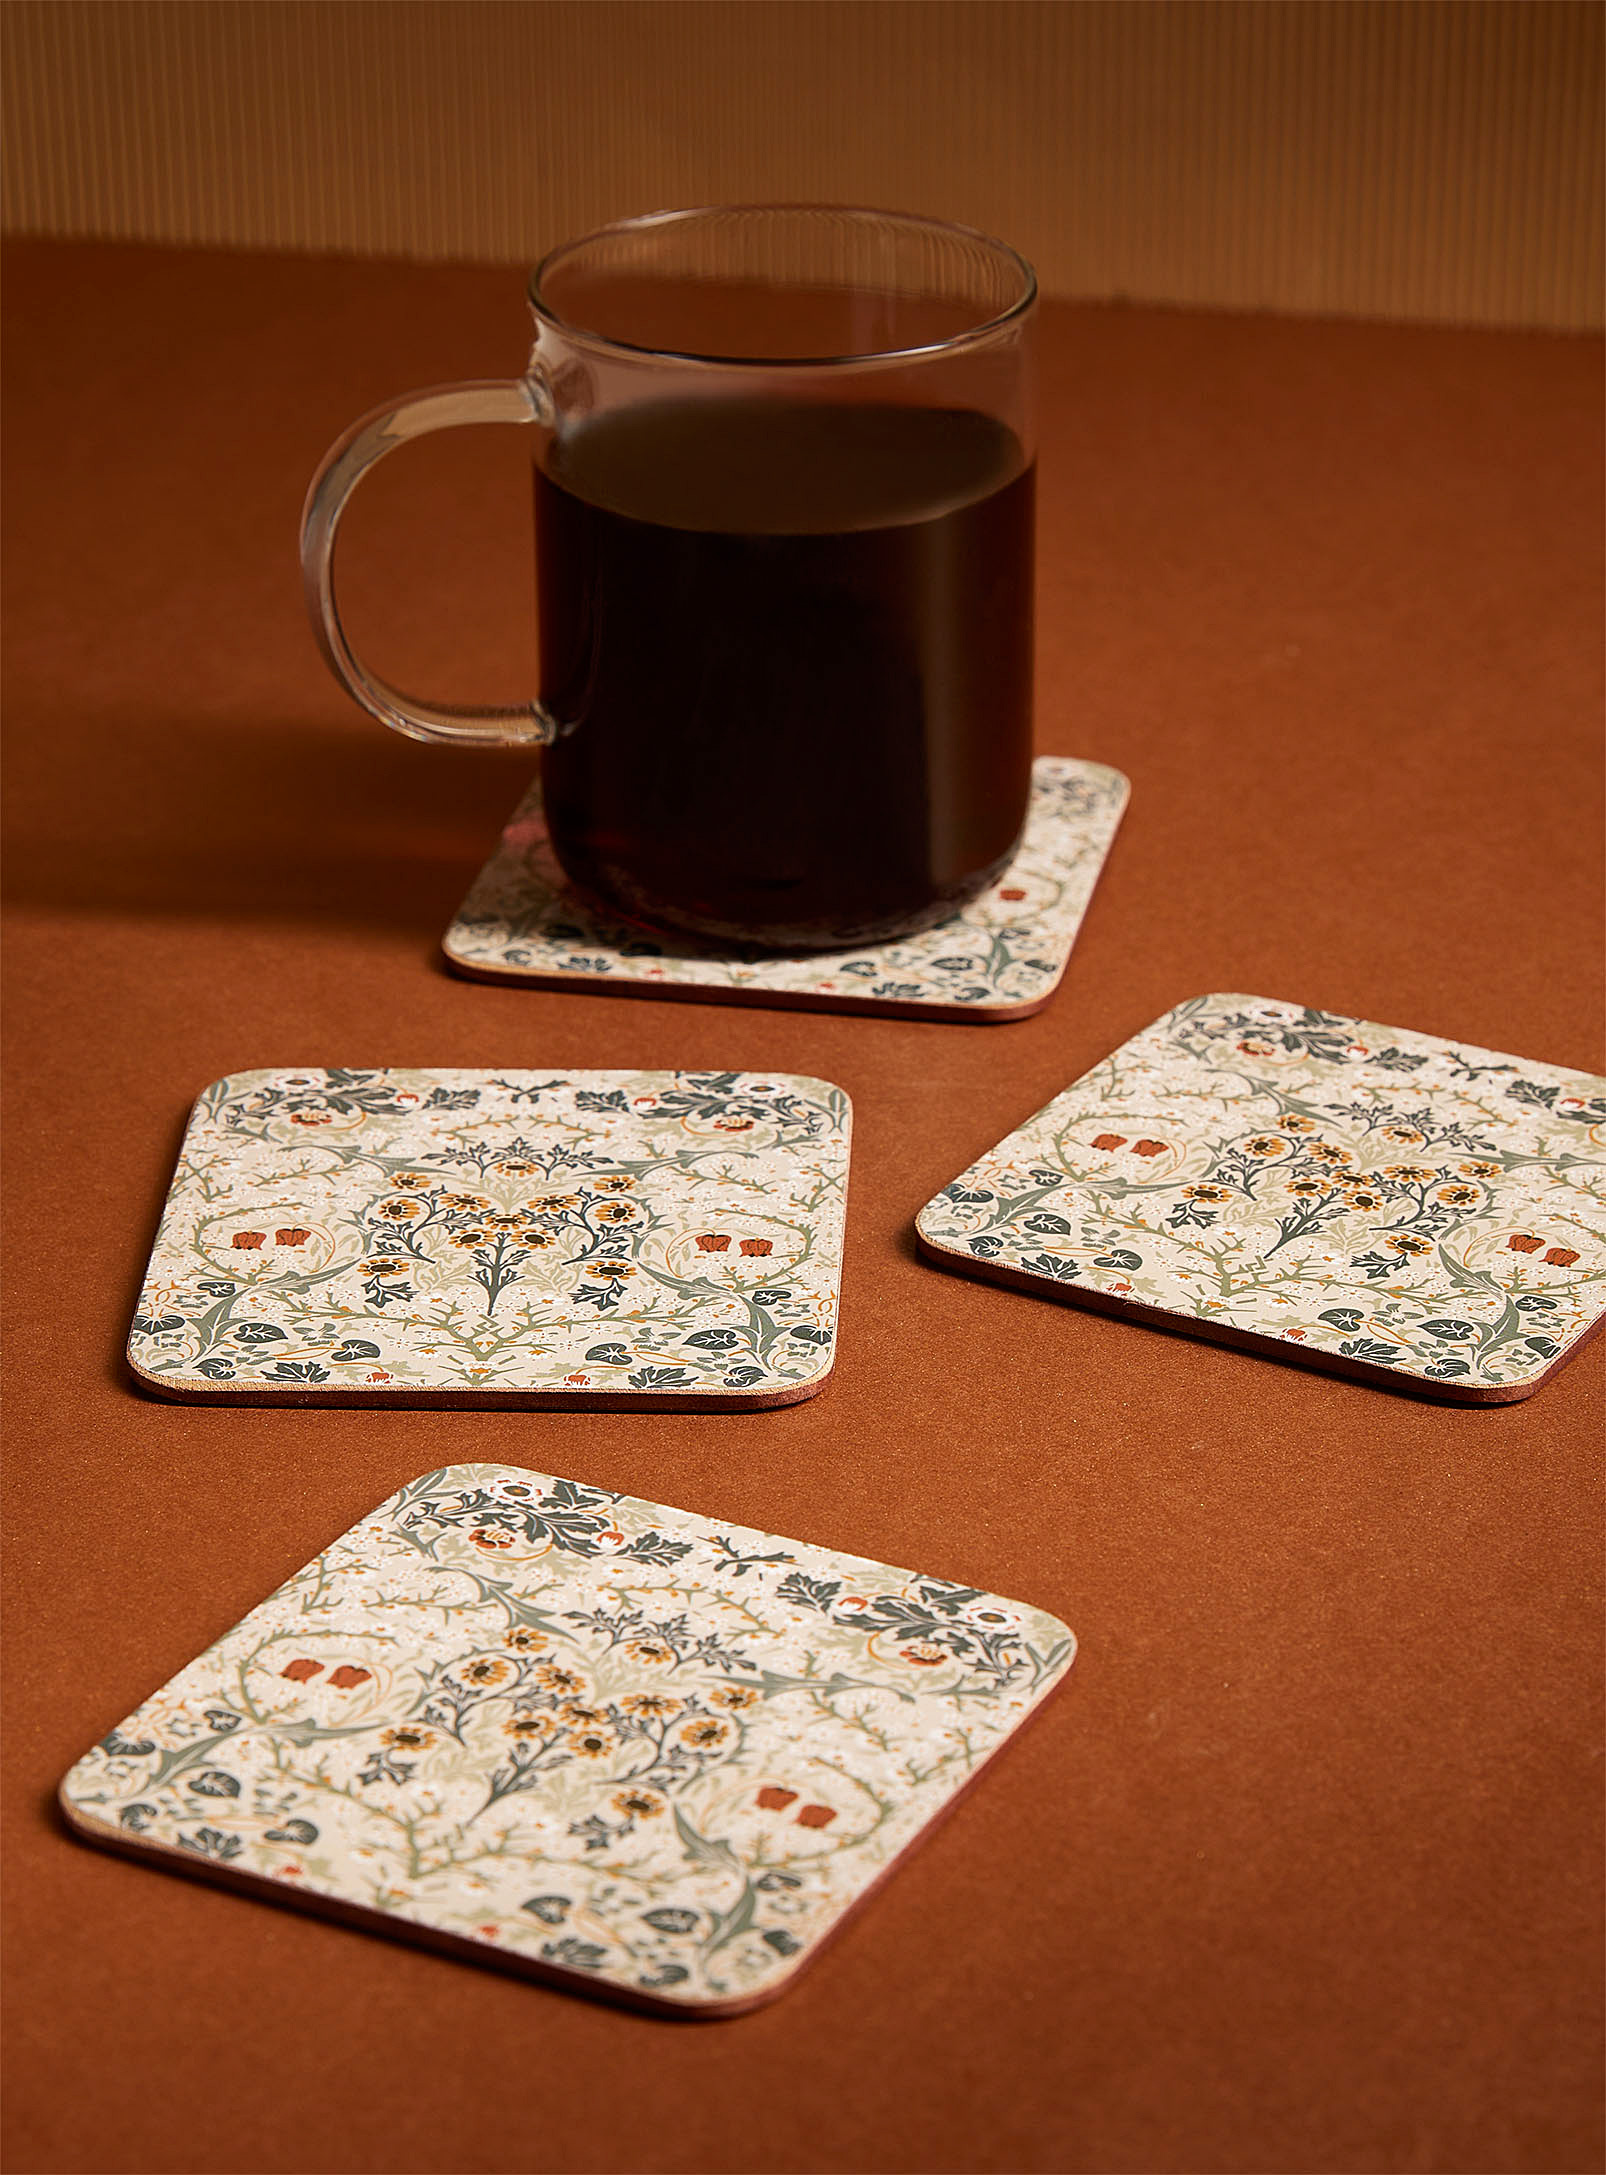 Simons Maison Flowers Of Yesteryear Laminated Cork Coasters Set Of 4 In Patterned Grey